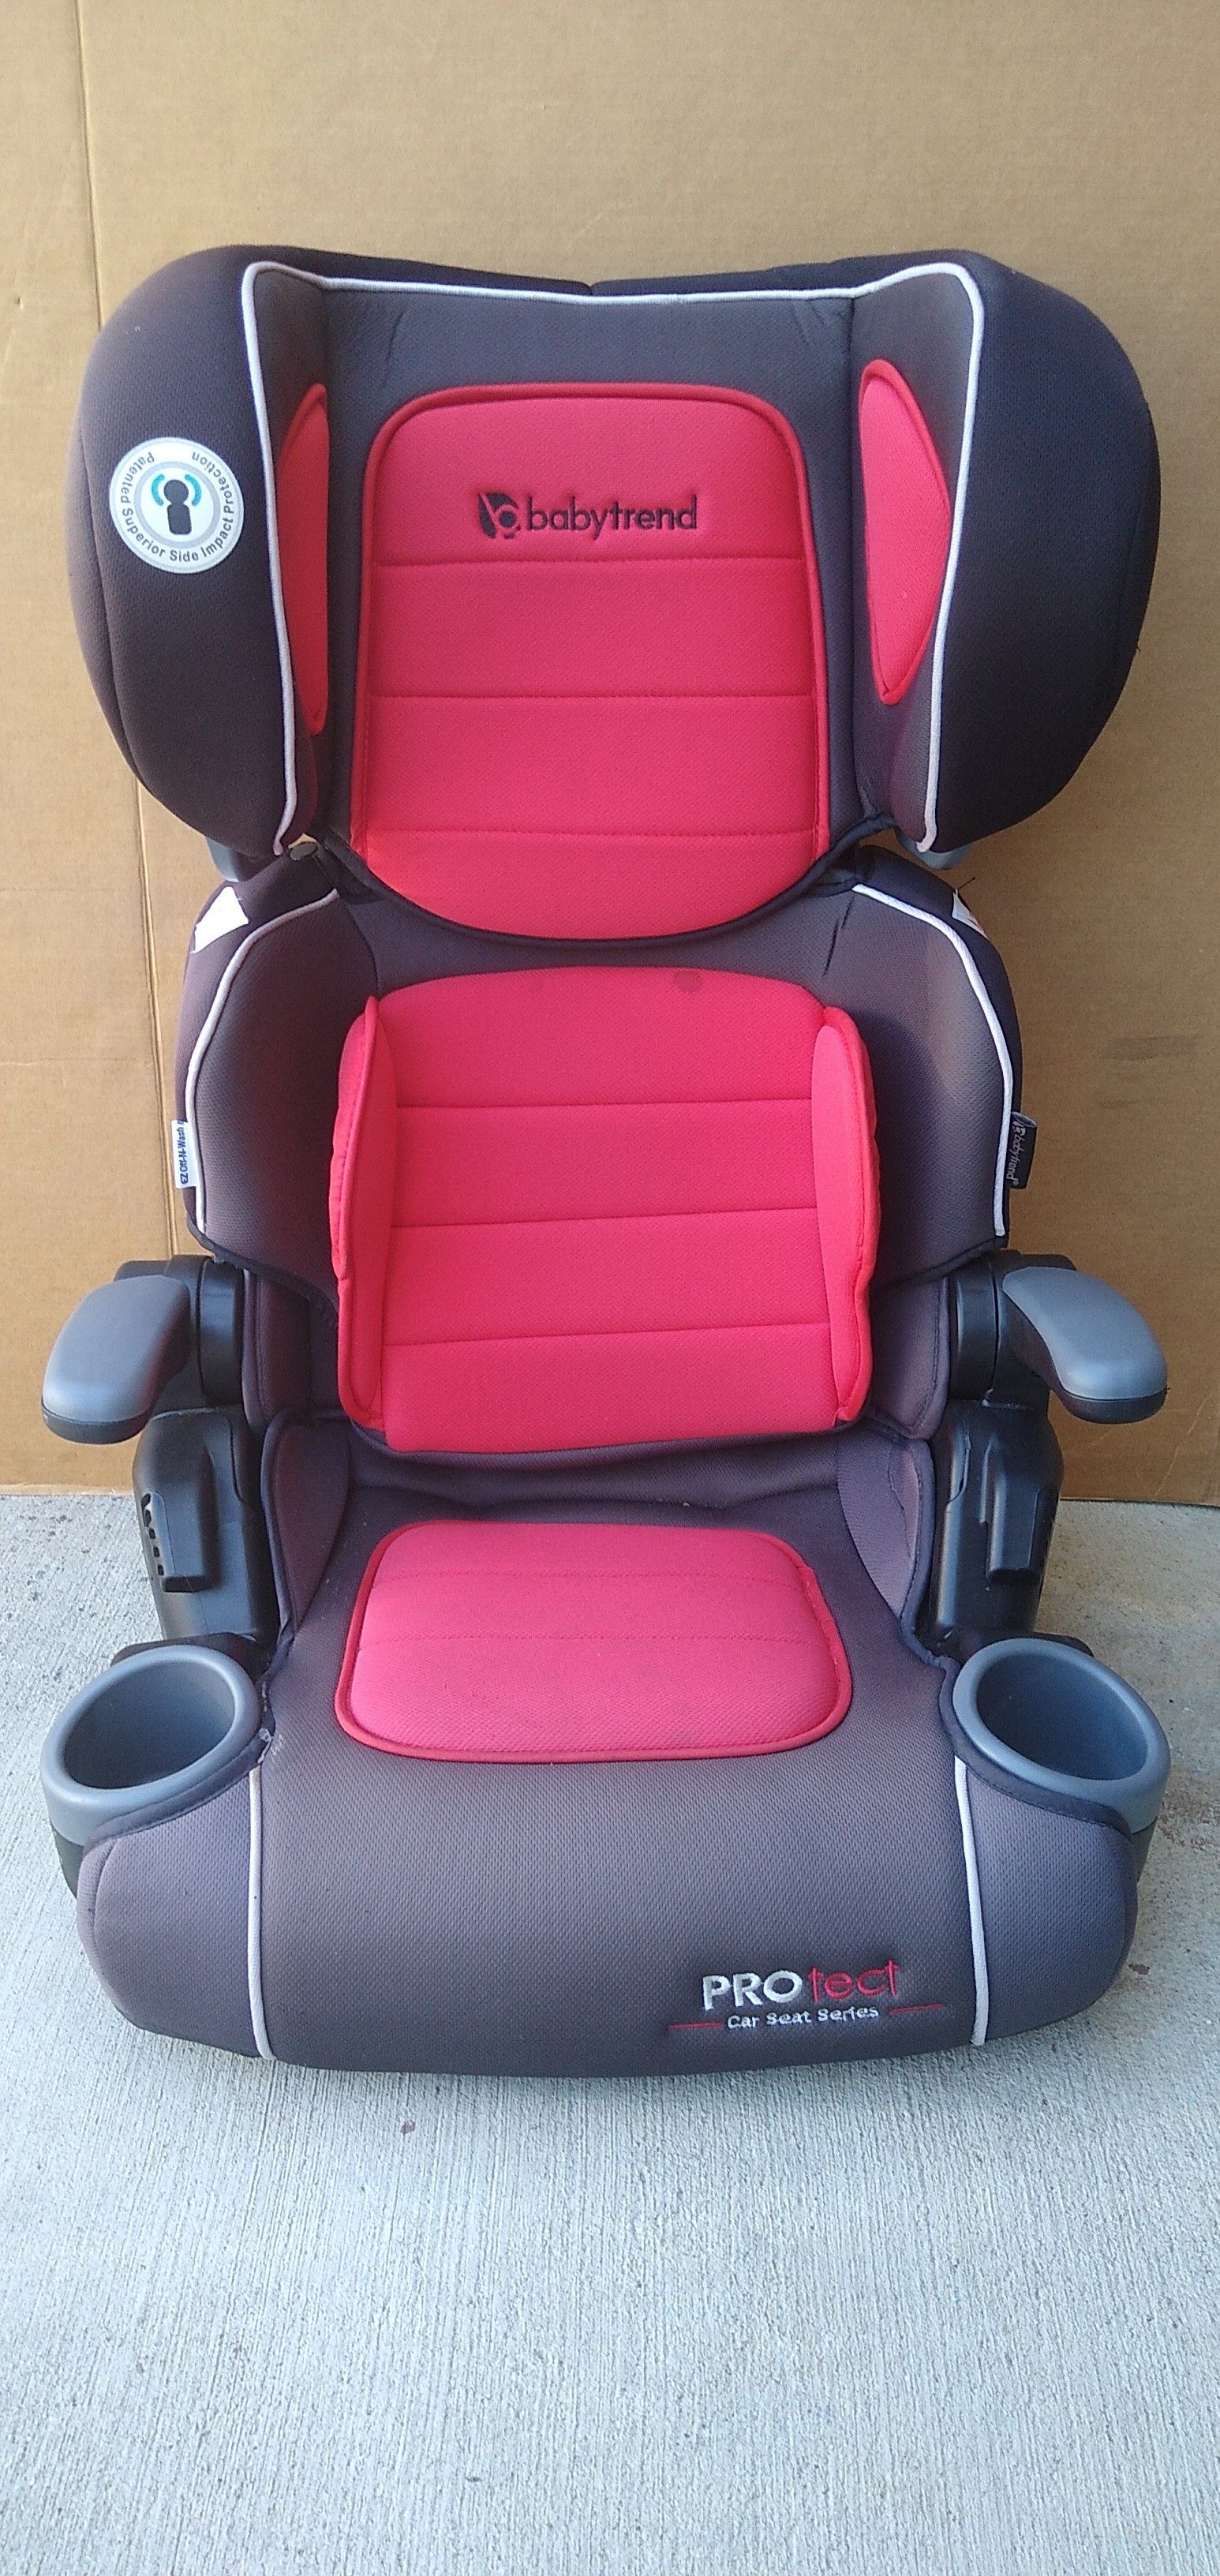 Booster car seat with back